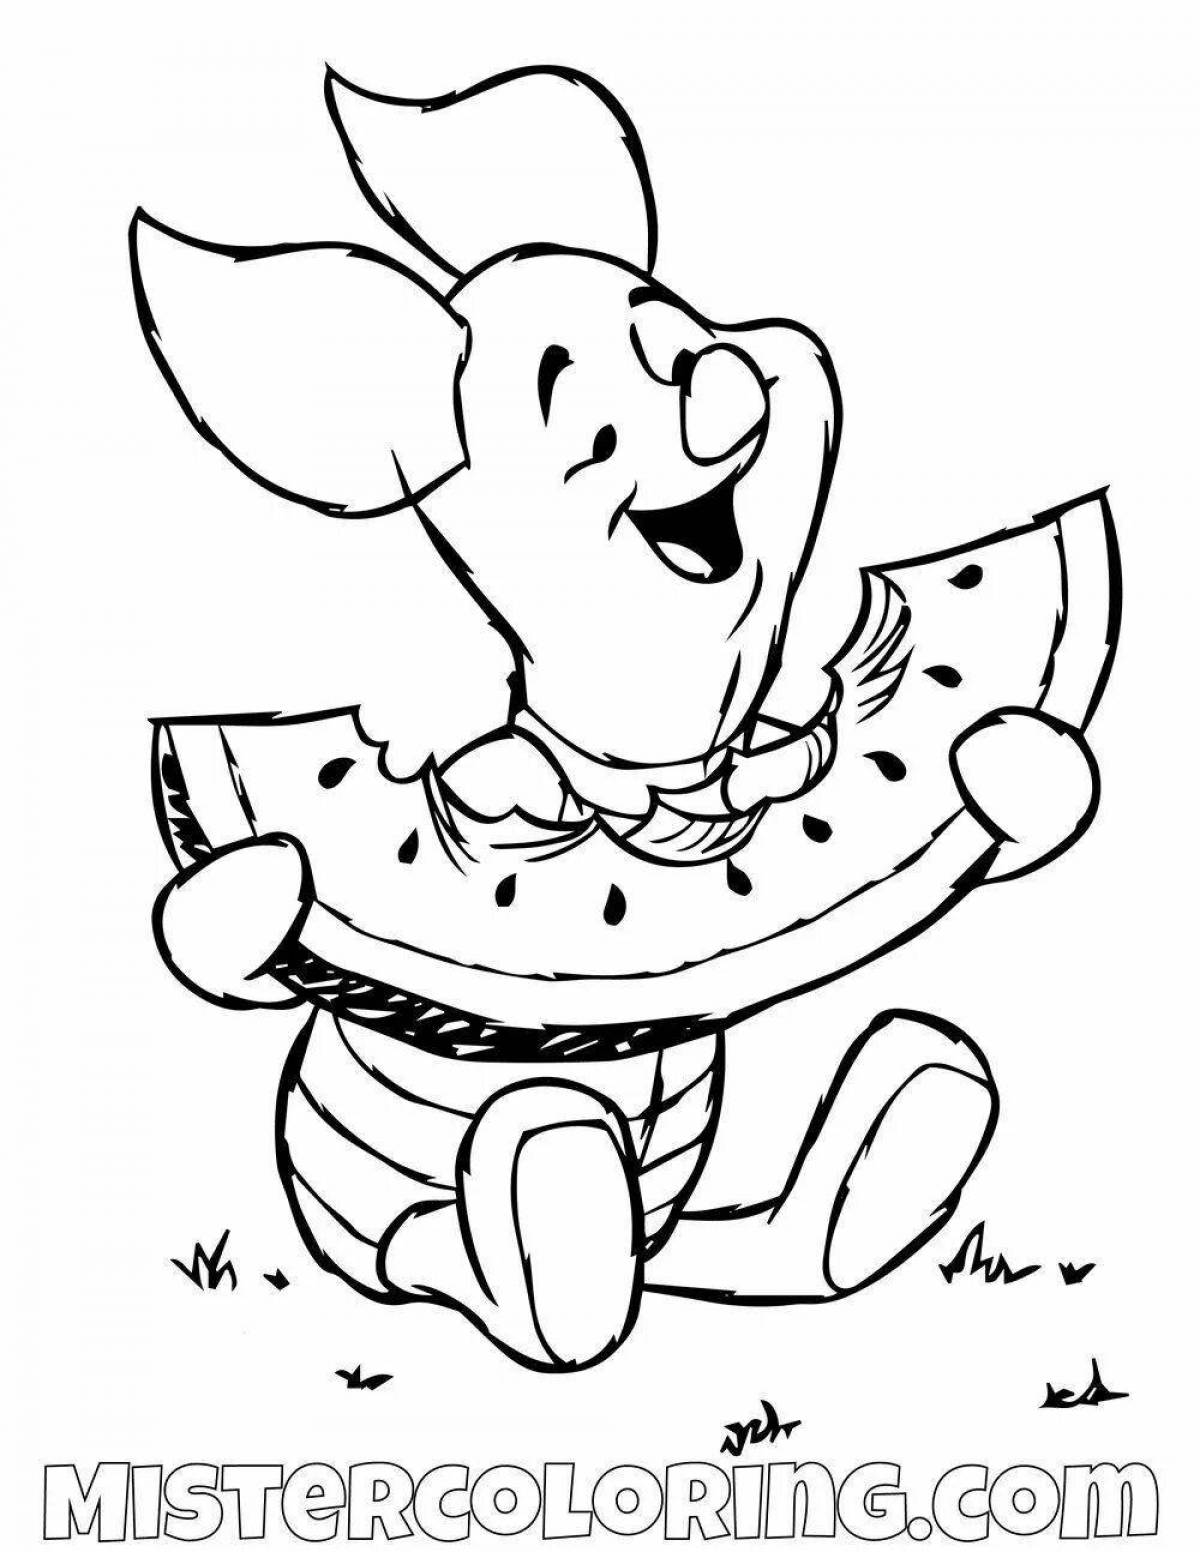 Live cartoon character coloring page